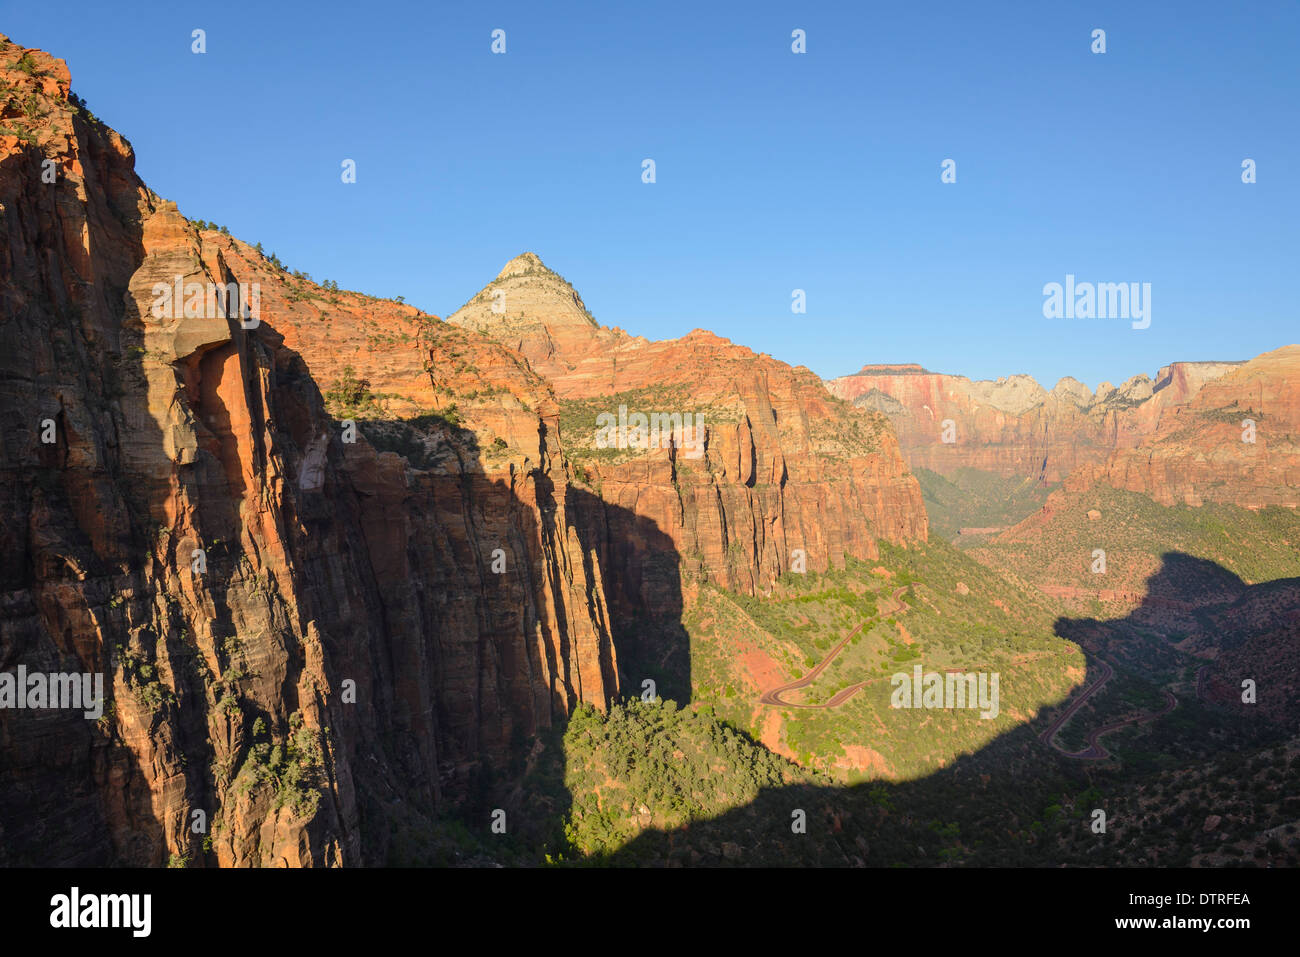 Views from Canyon Overlook trail, Zion National Park, Utah, USA Stock Photo